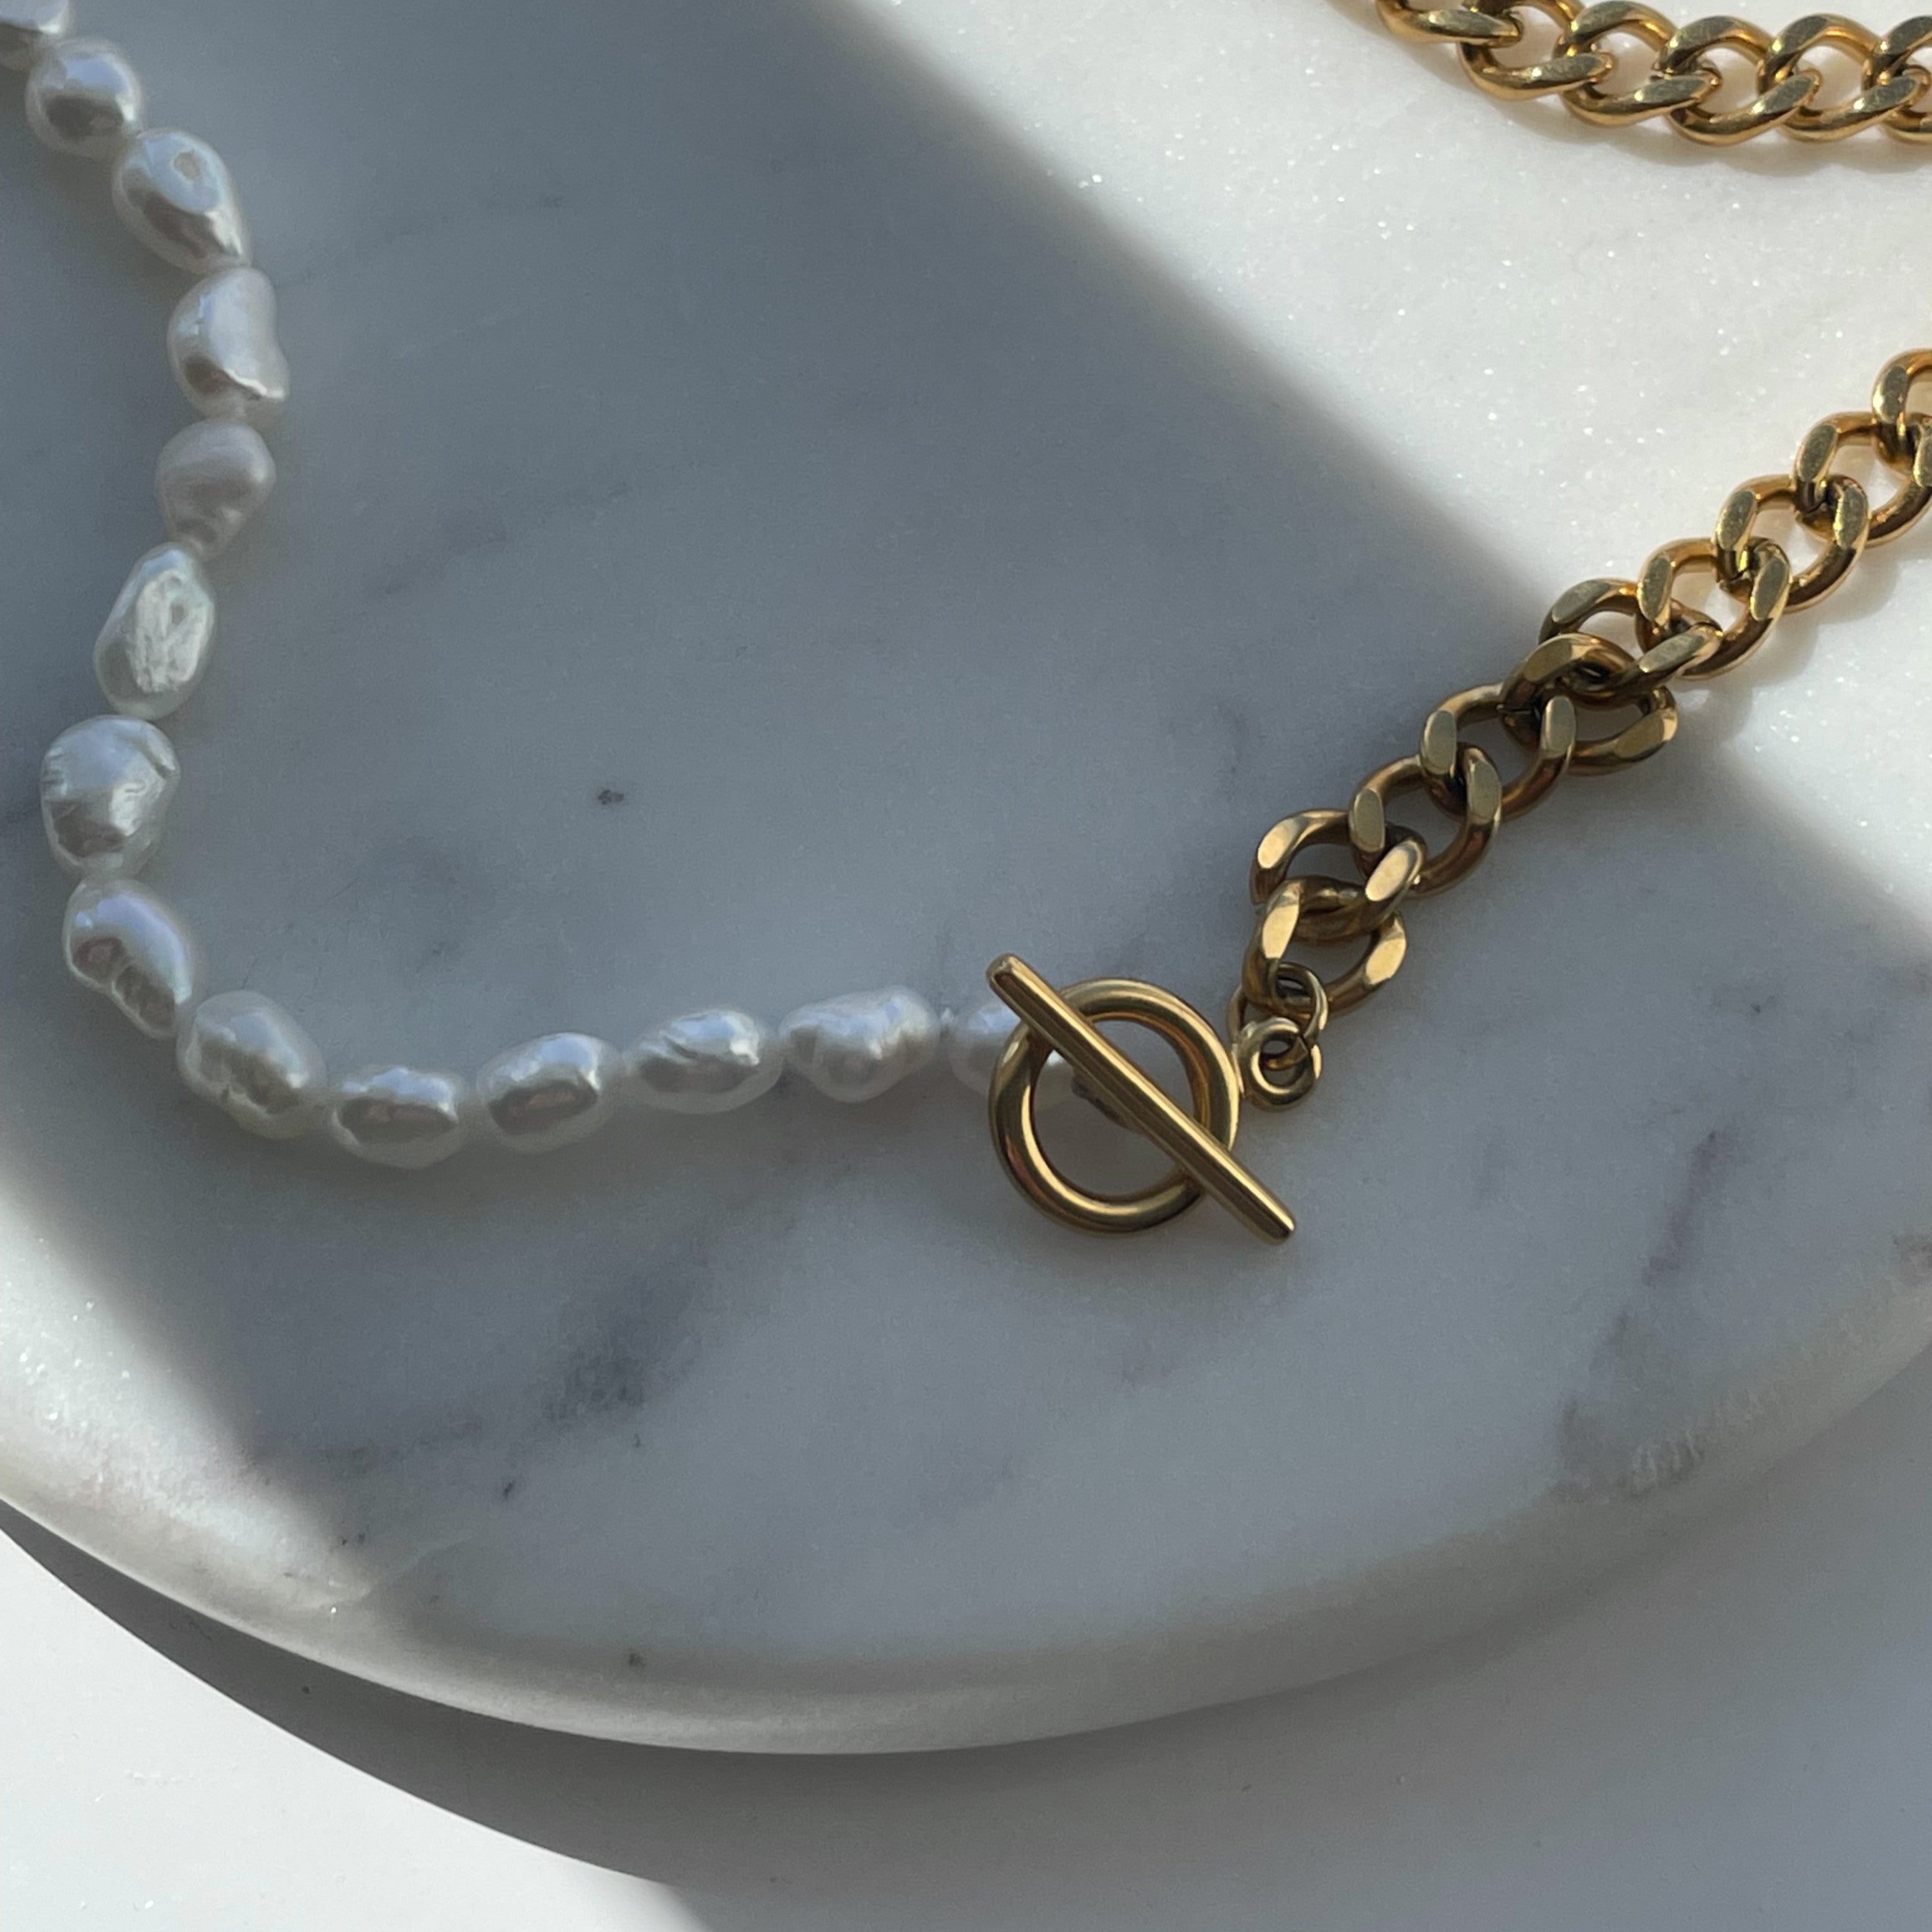 earl Chain Necklace: Elevate your style with this stunning gold pearl accessory